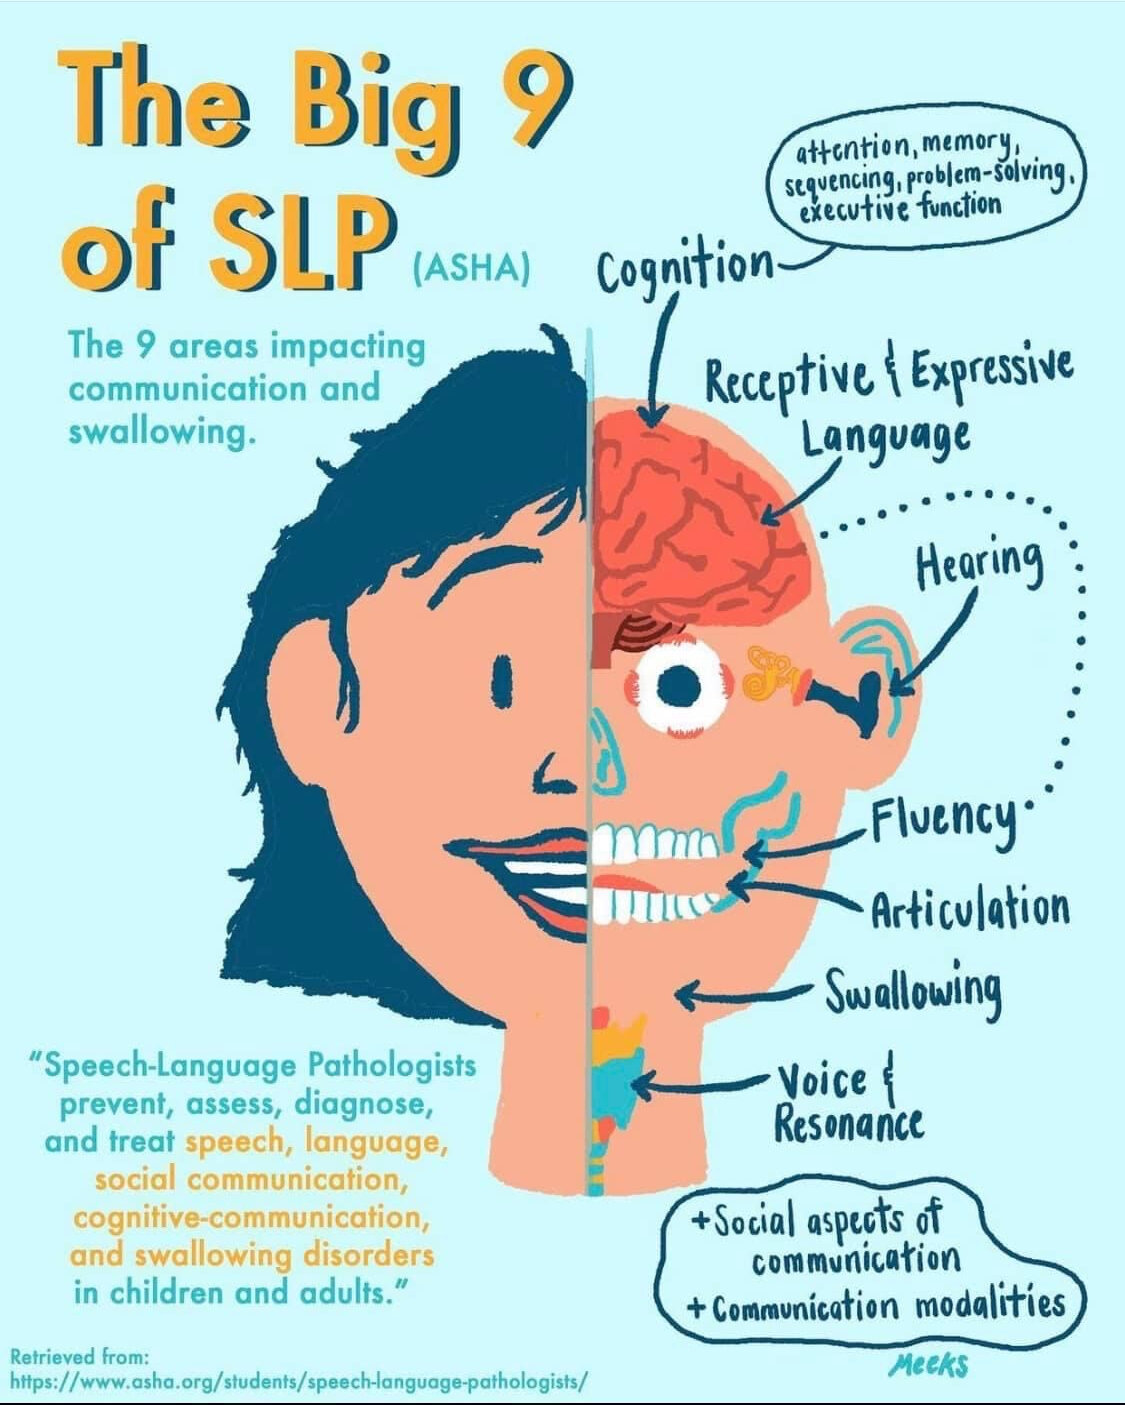 May is Better Hearing and Speech Month! To start off our month-long celebration of all things speech, language, and hearing - we wanted to give a brief overview of what speech-language pathologists do! An SLP's scope of practice can be divided into w